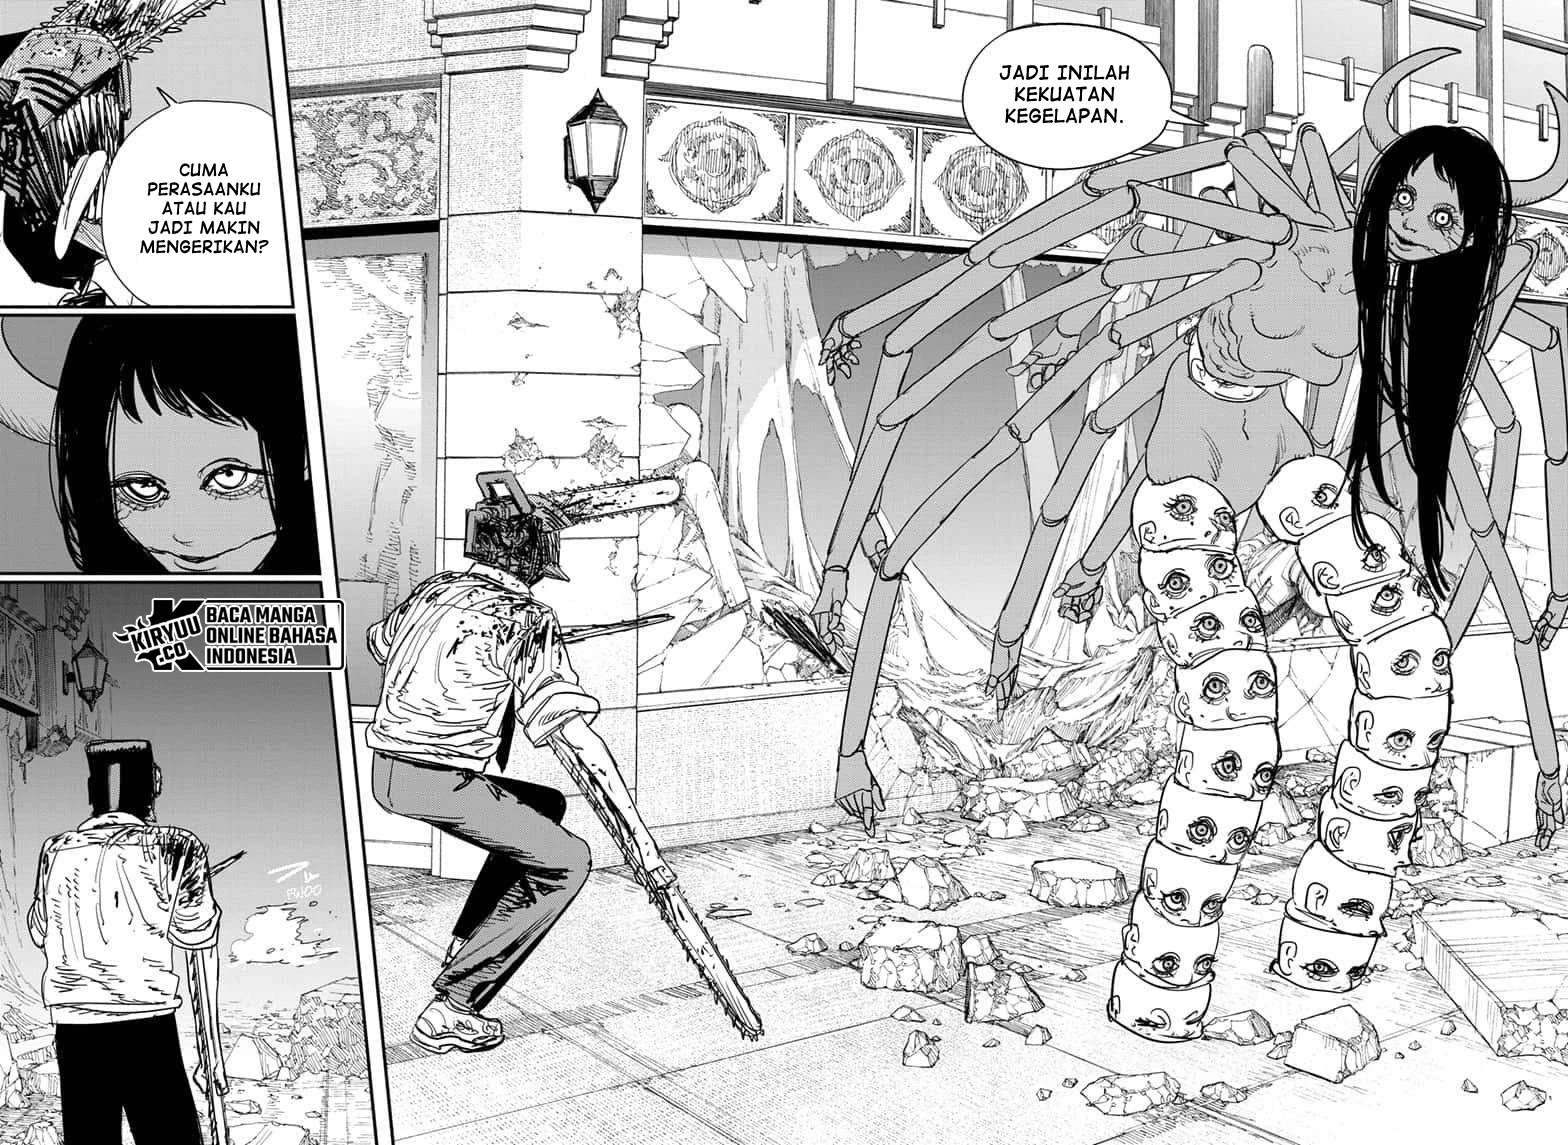 Chainsaw Man Chapter 68 Bahasa Indonesia